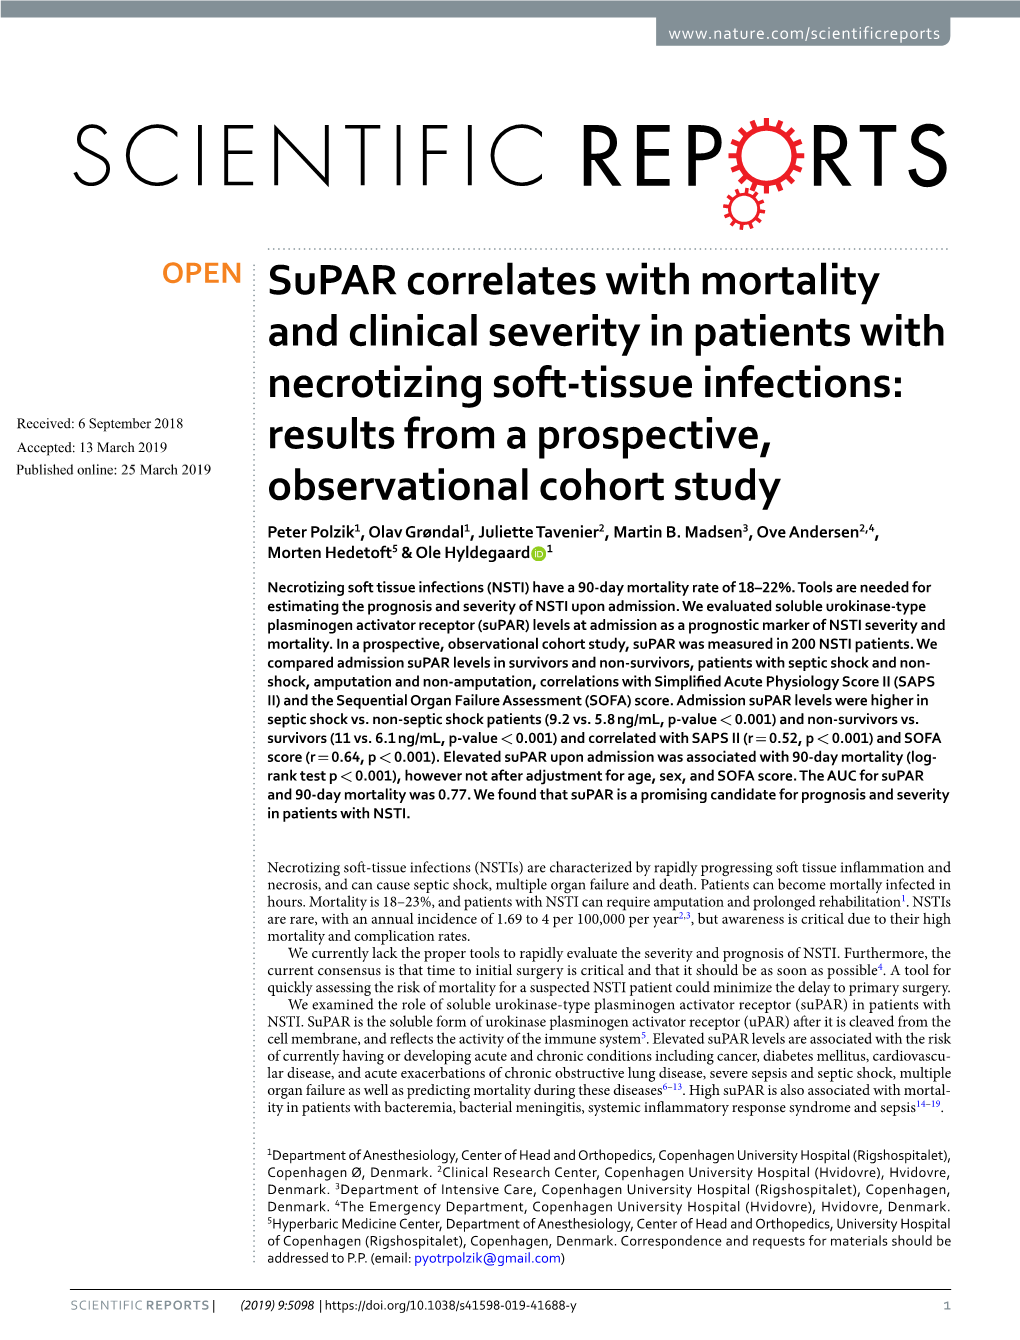 Supar Correlates with Mortality and Clinical Severity in Patients